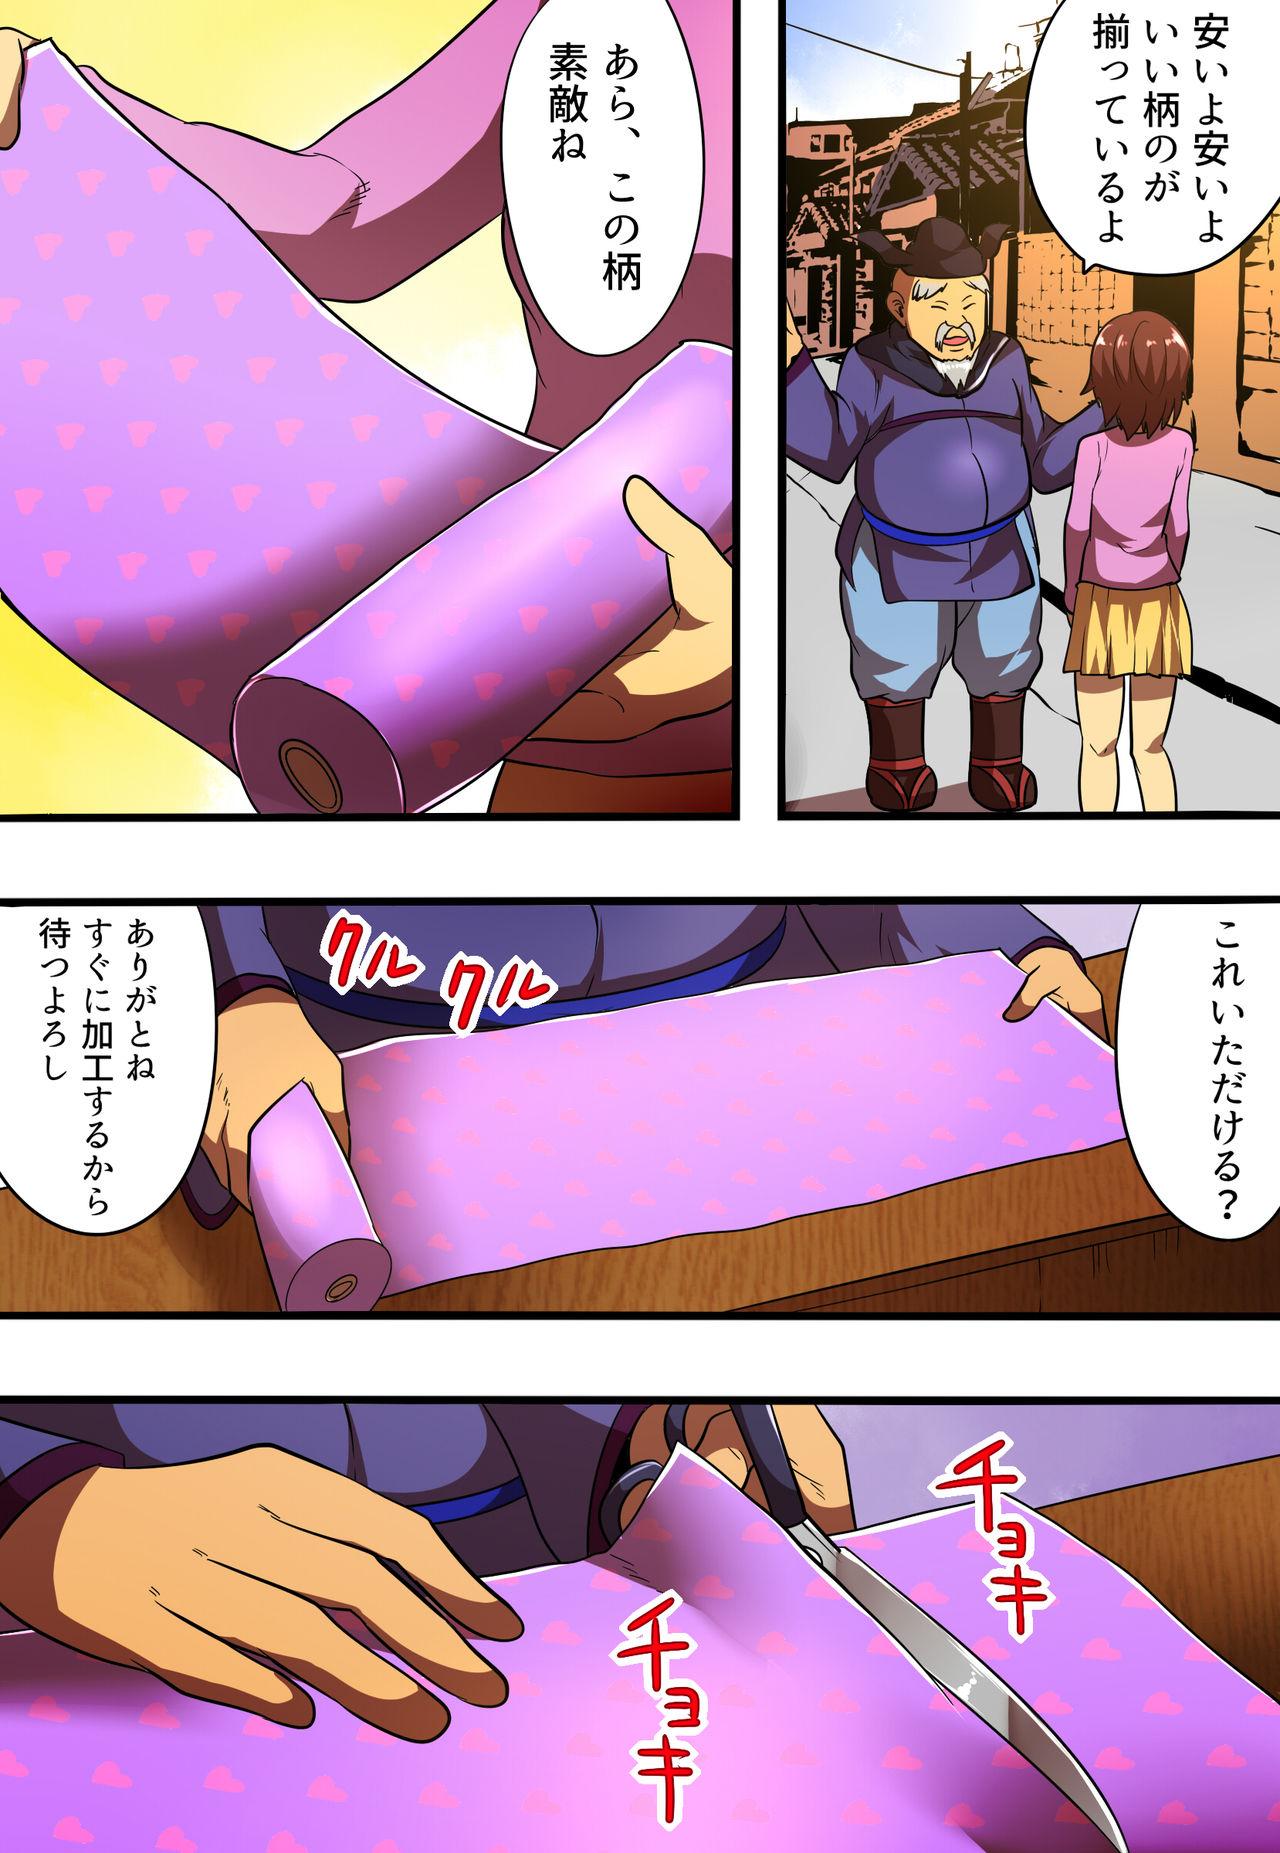 Tittyfuck shinenkan Comic of Textile-ification ghost storys Orgasmus - Page 6